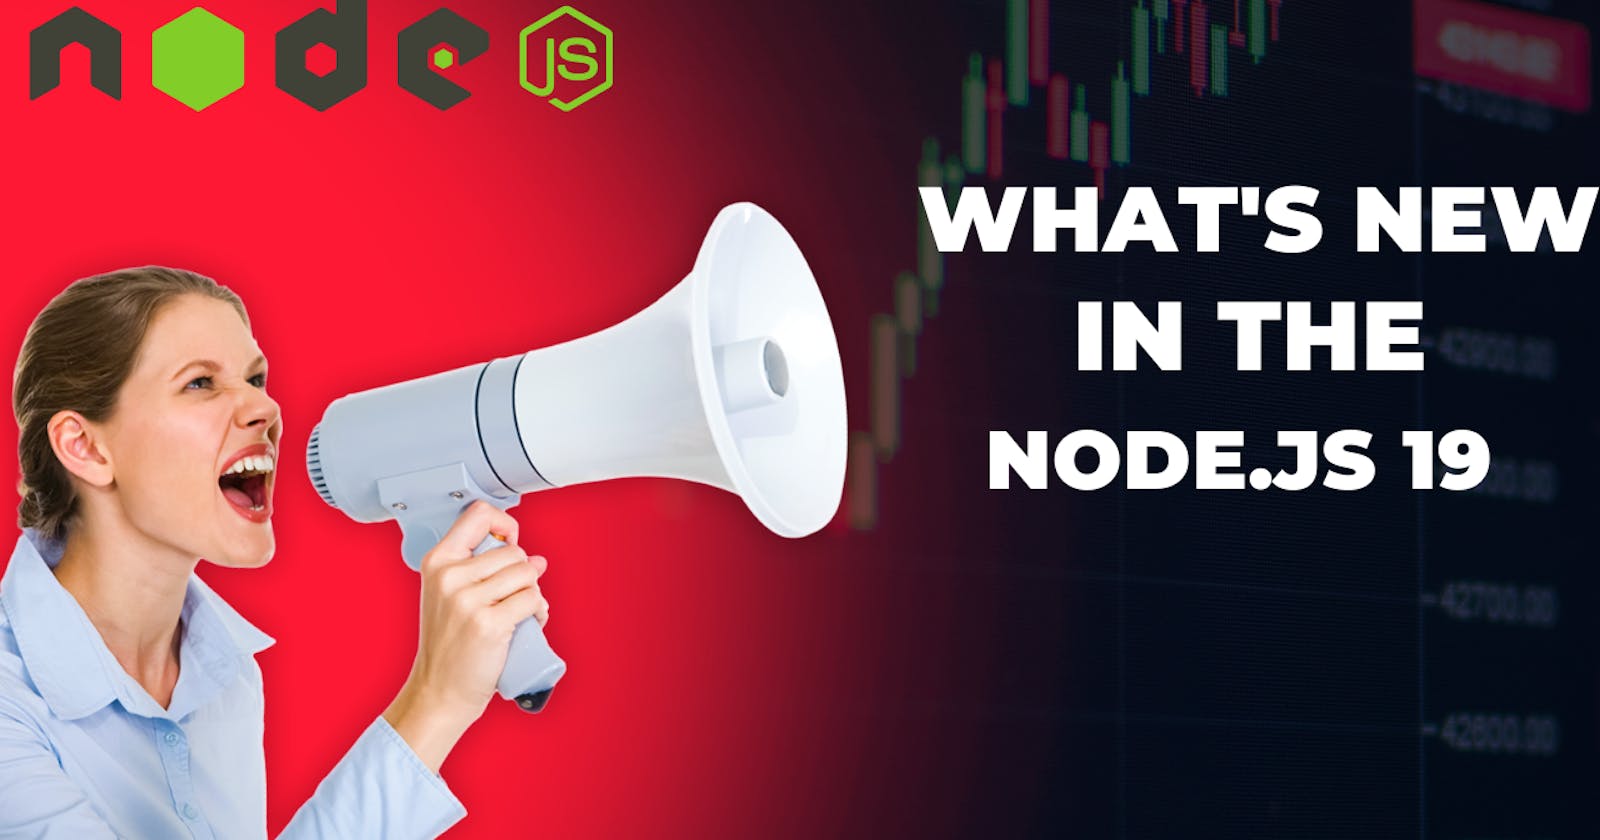 What's new in Node.js version 19?